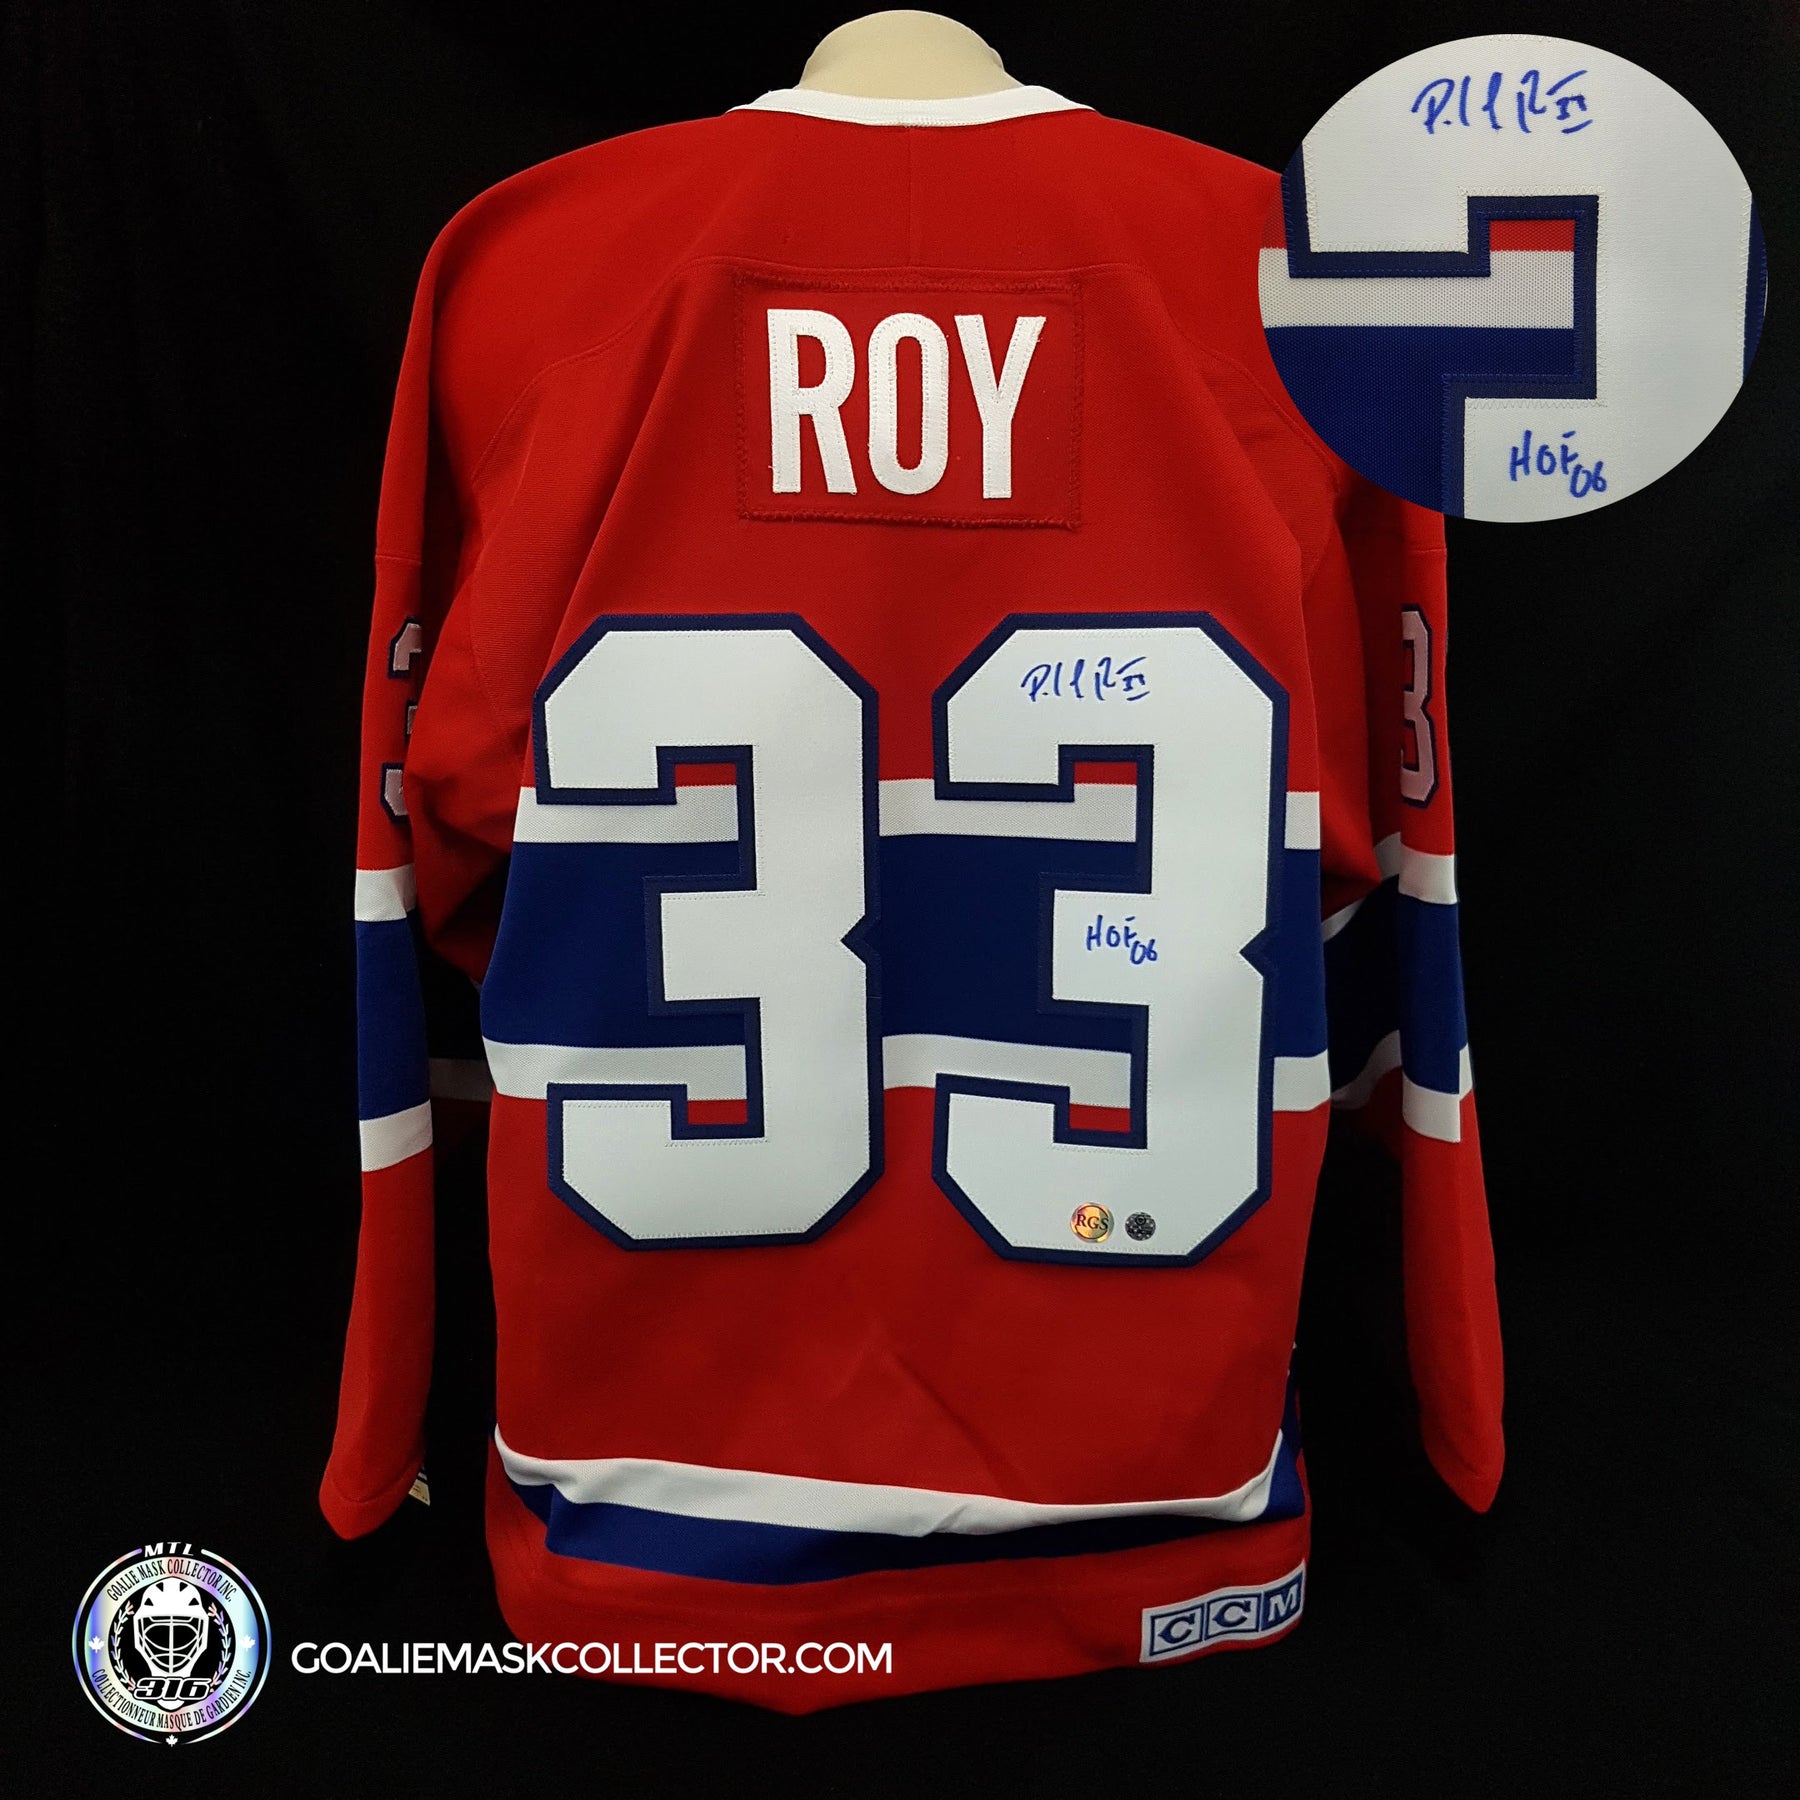 Patrick Roy Montreal Canadiens Signed Jersey CCM Authentic Vintage Wit –  Goalie Mask Collector